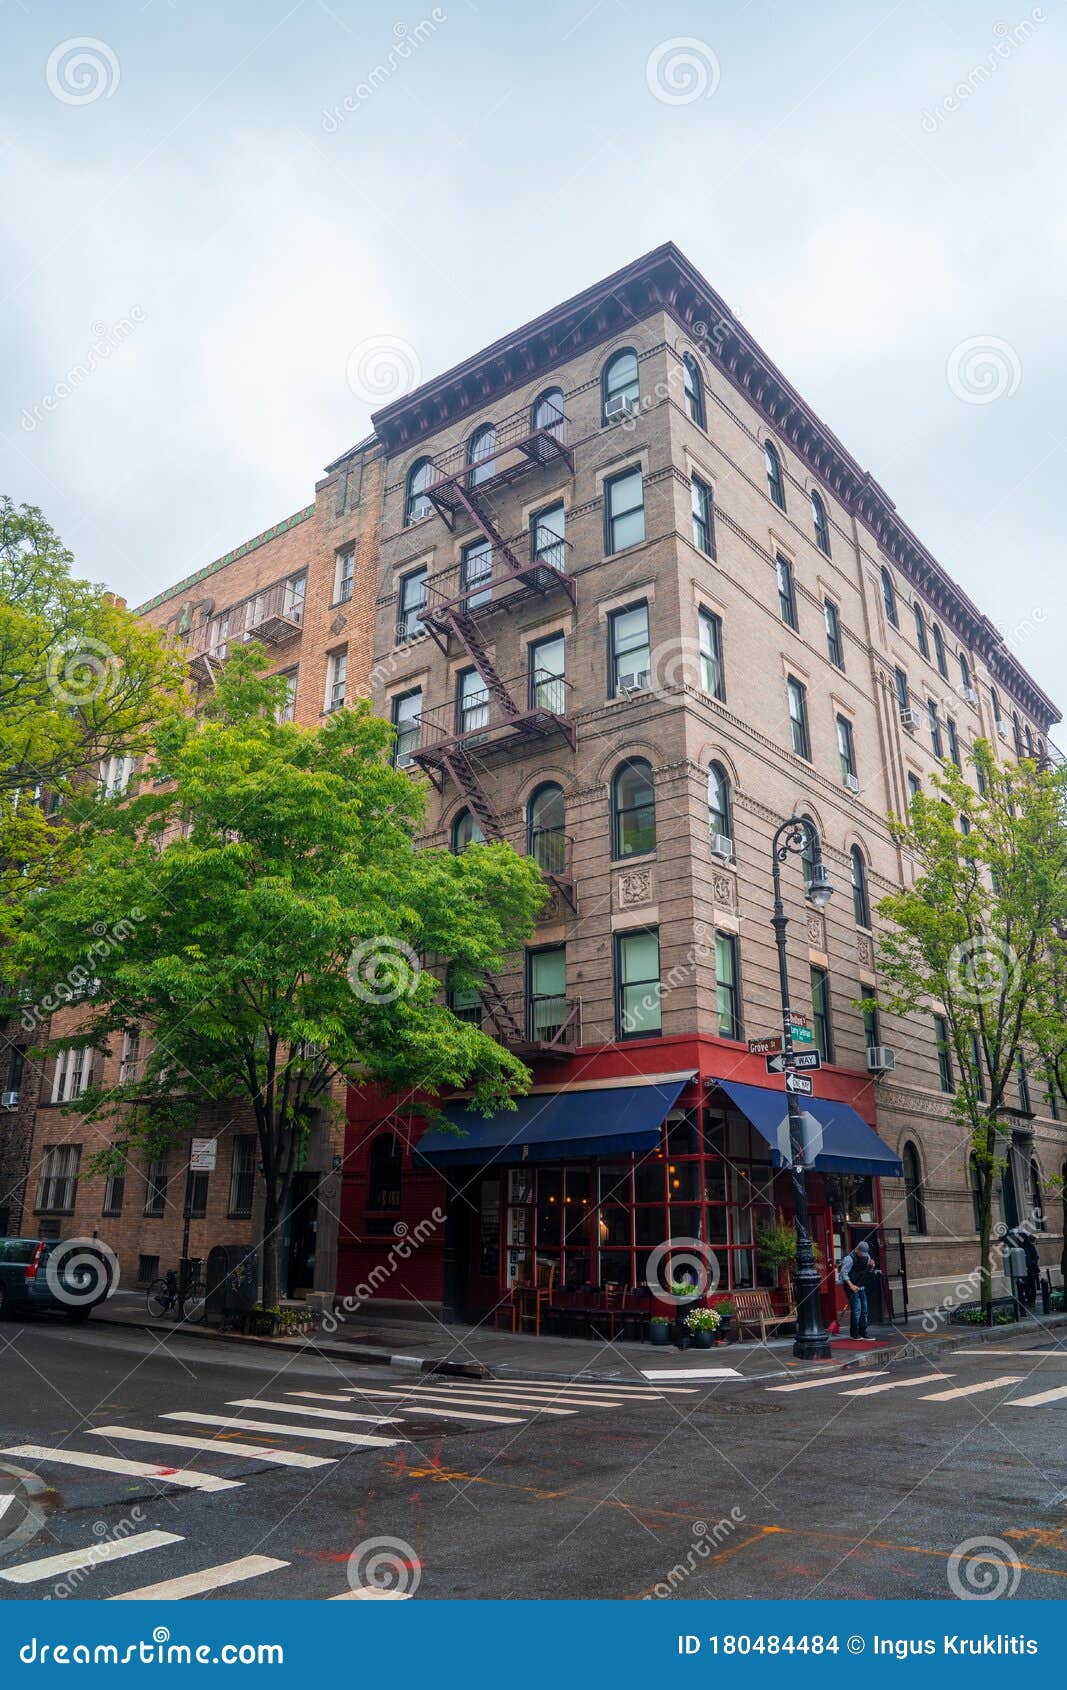 Friends TV Show Apartment Building In Greenwich Village New York